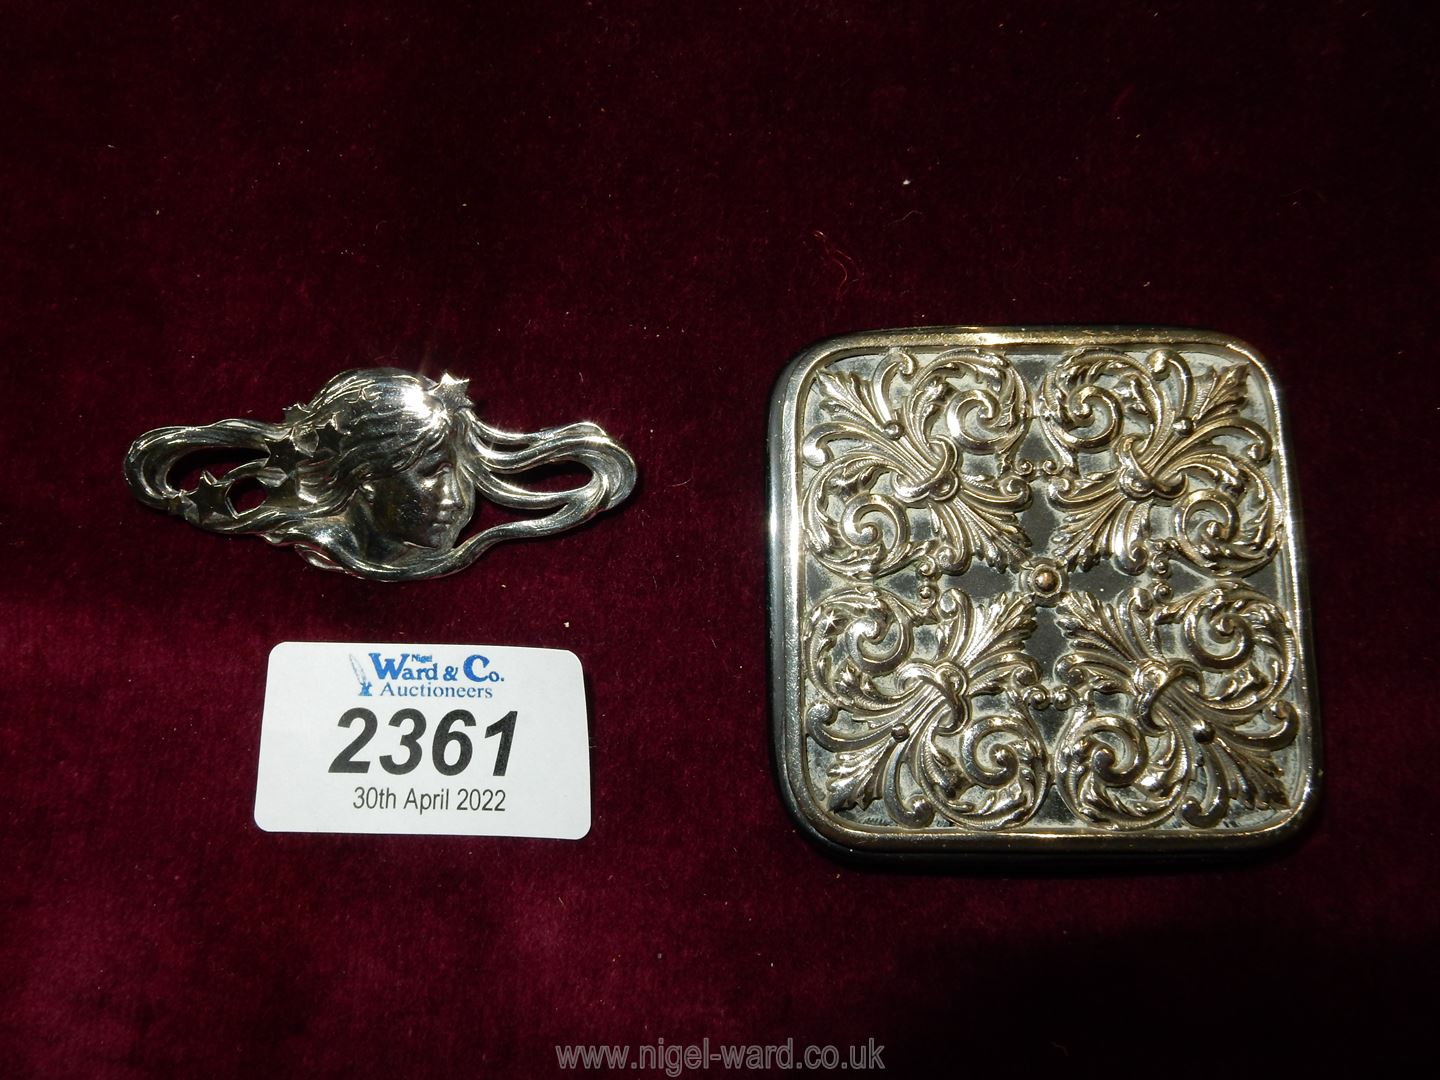 A white metal belt buckle and Art Nouveau style brooch with Virgo detail.